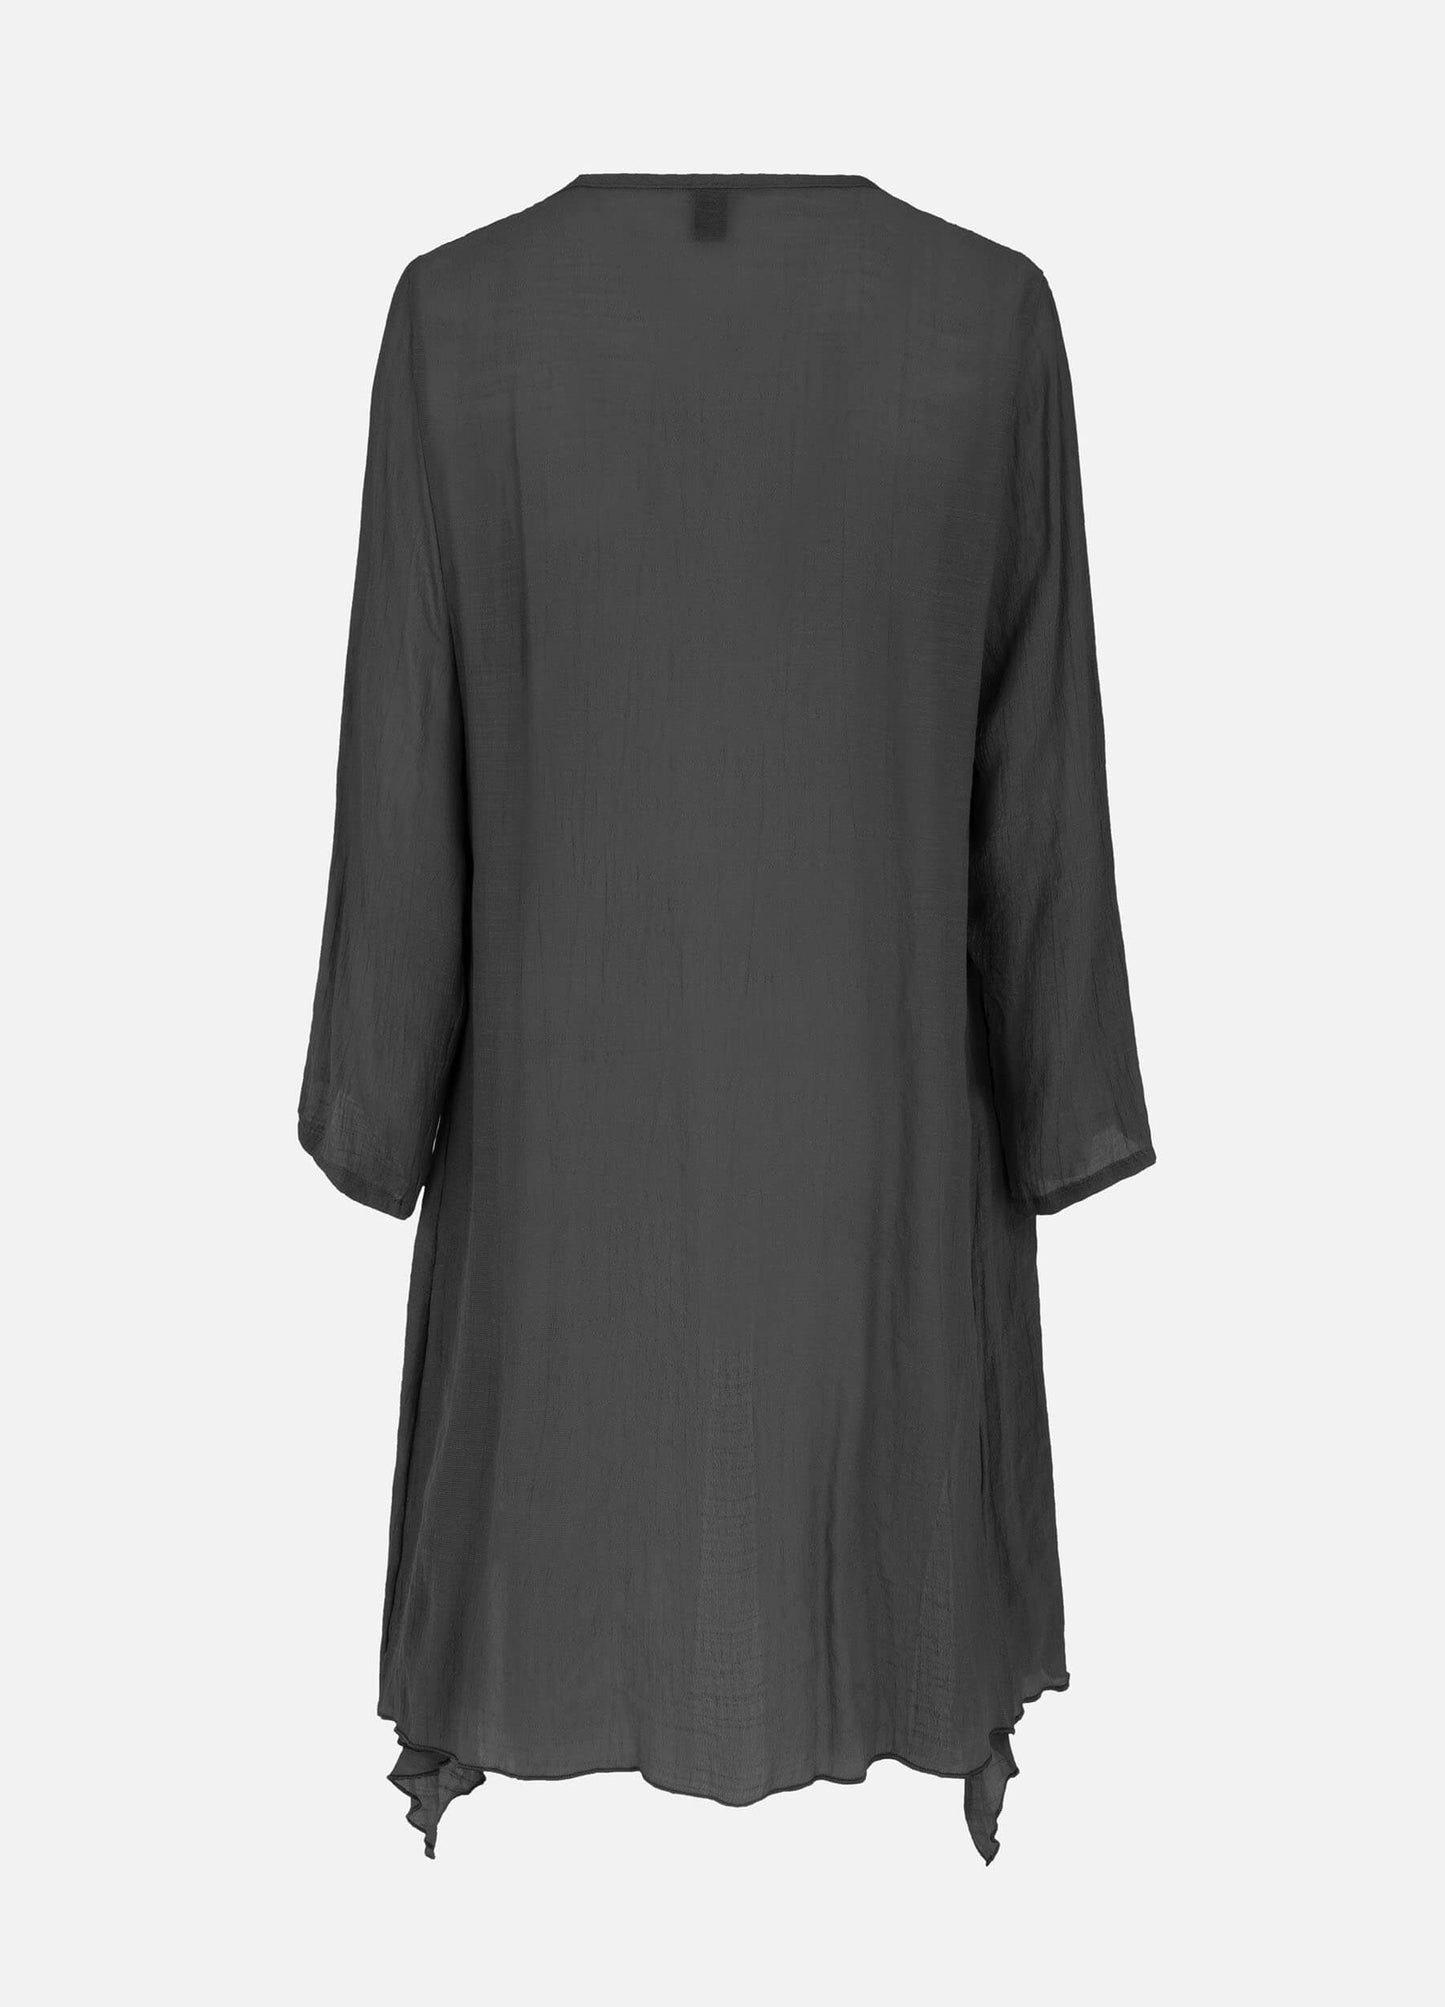 MECALA Women's Solid Linen Black Cardigan Dress with Wooden Fish Necklace